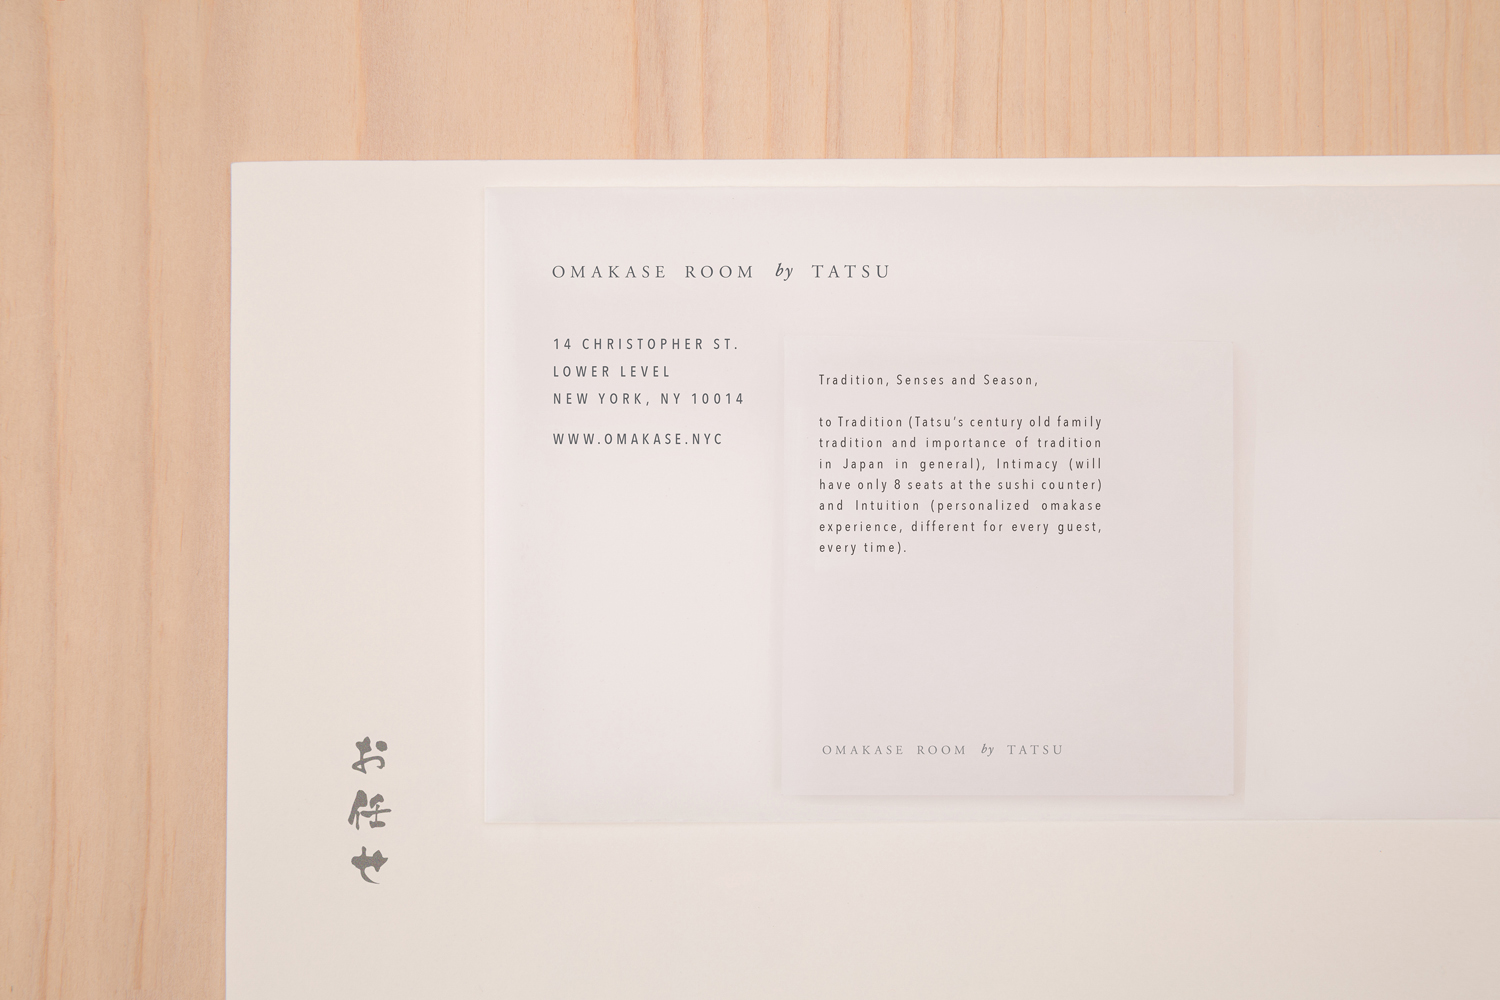 Visual identity and stationery designed by Savvy for New York restaurant Omakase Room by Tatsu